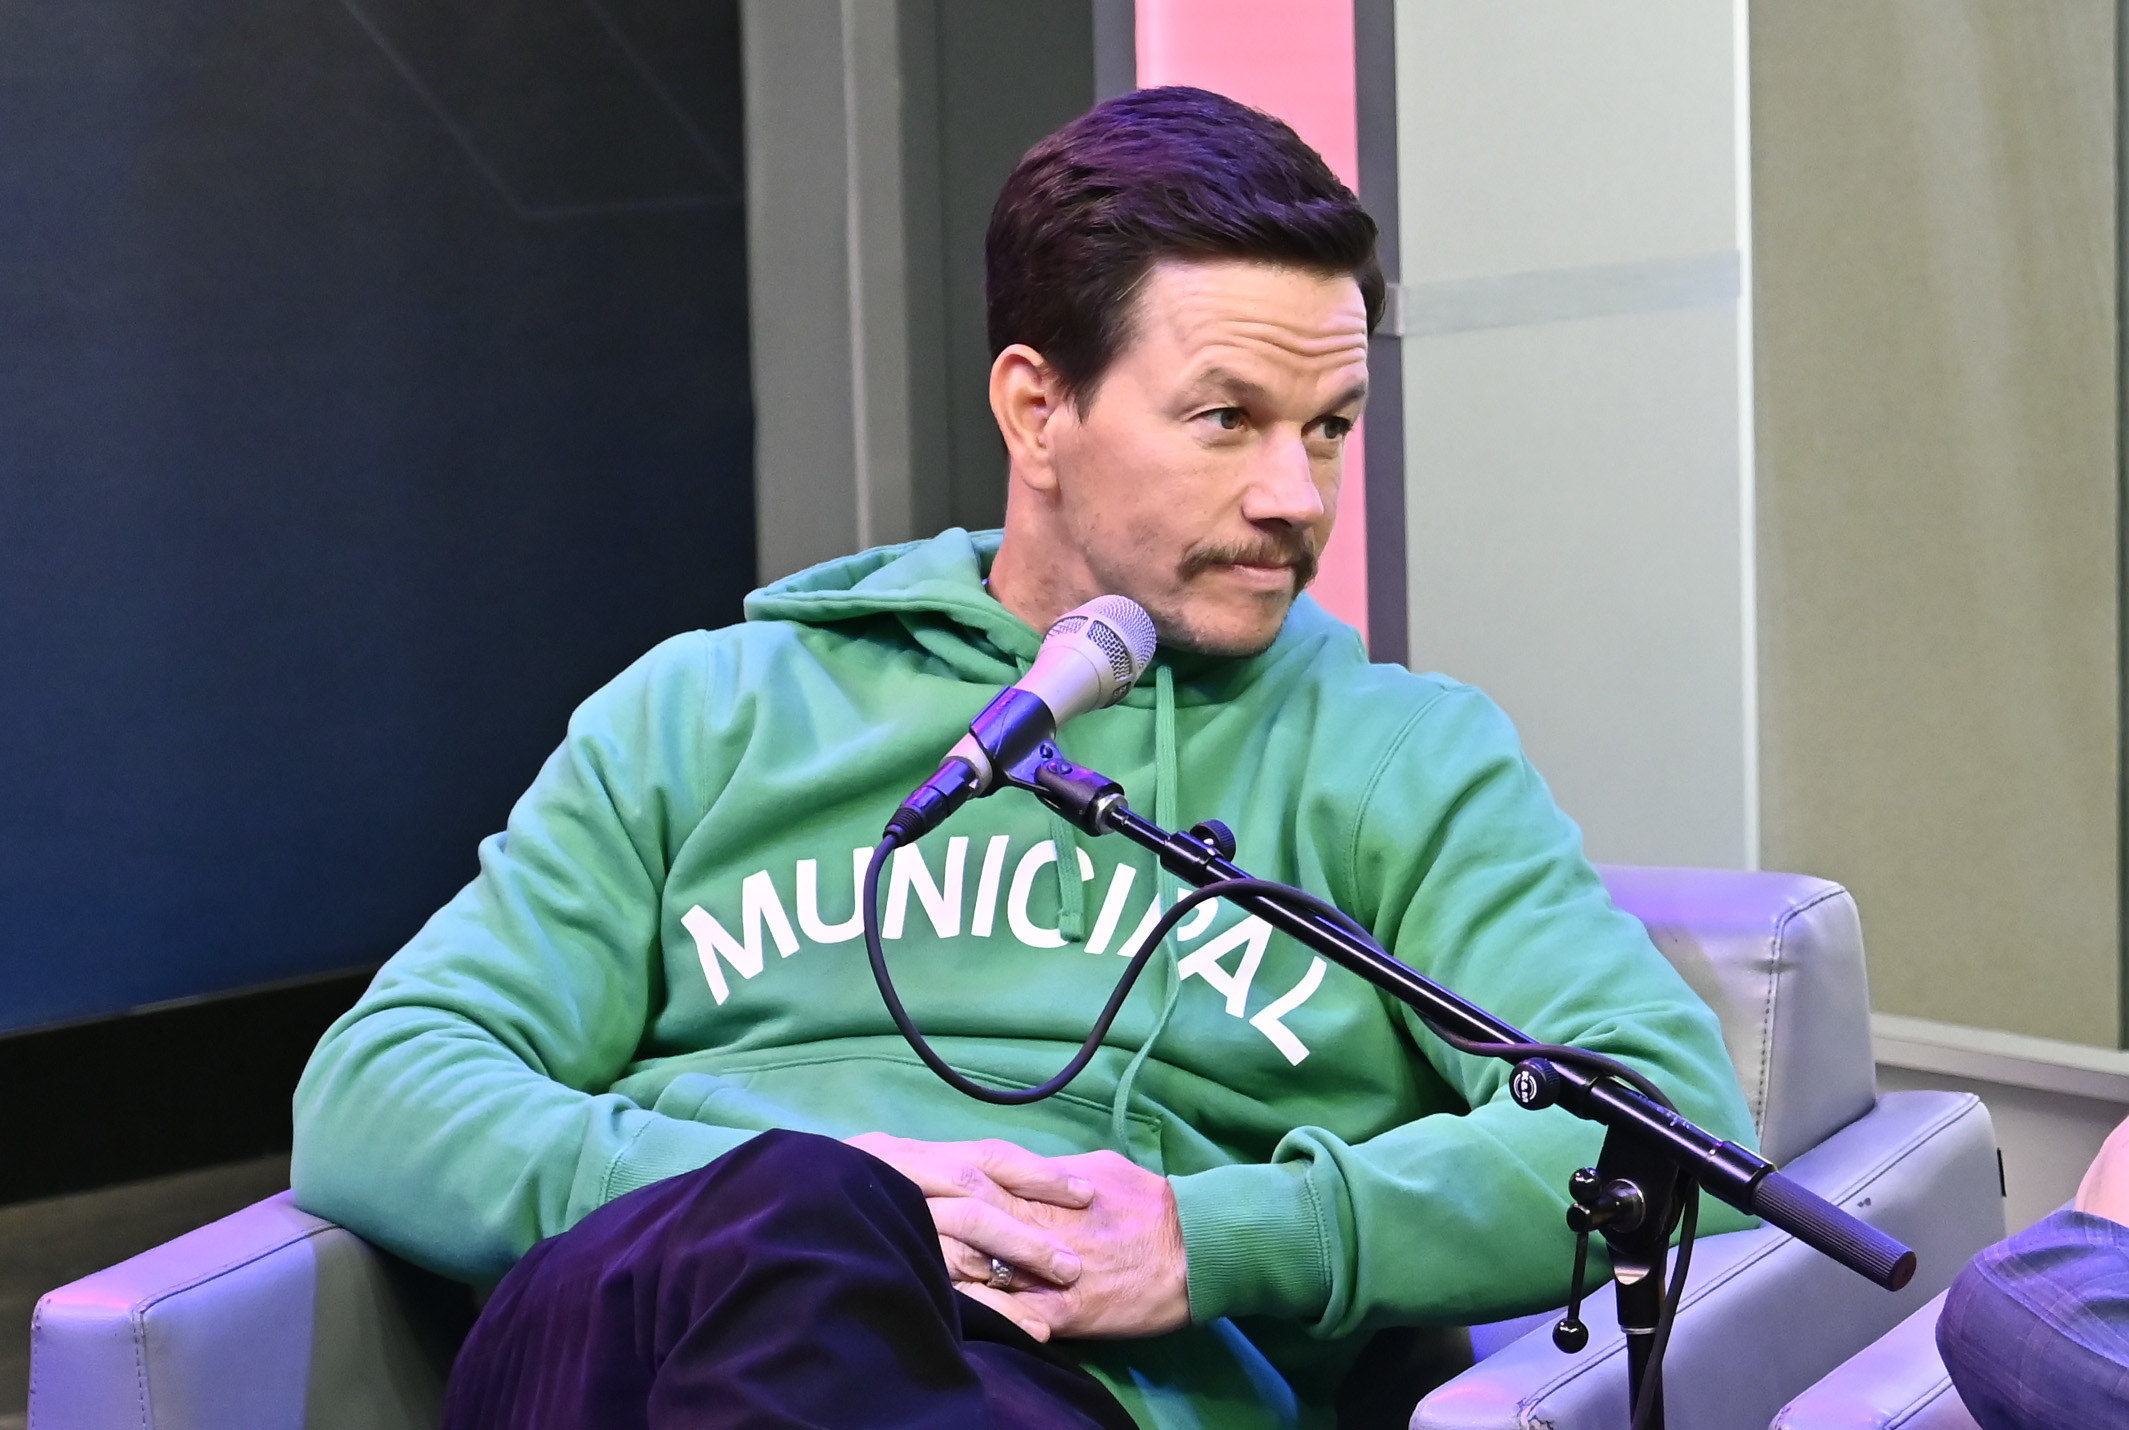 Actor Mark Wahlberg visits the SiriusXM Studios on February 17, 2022 in New York City